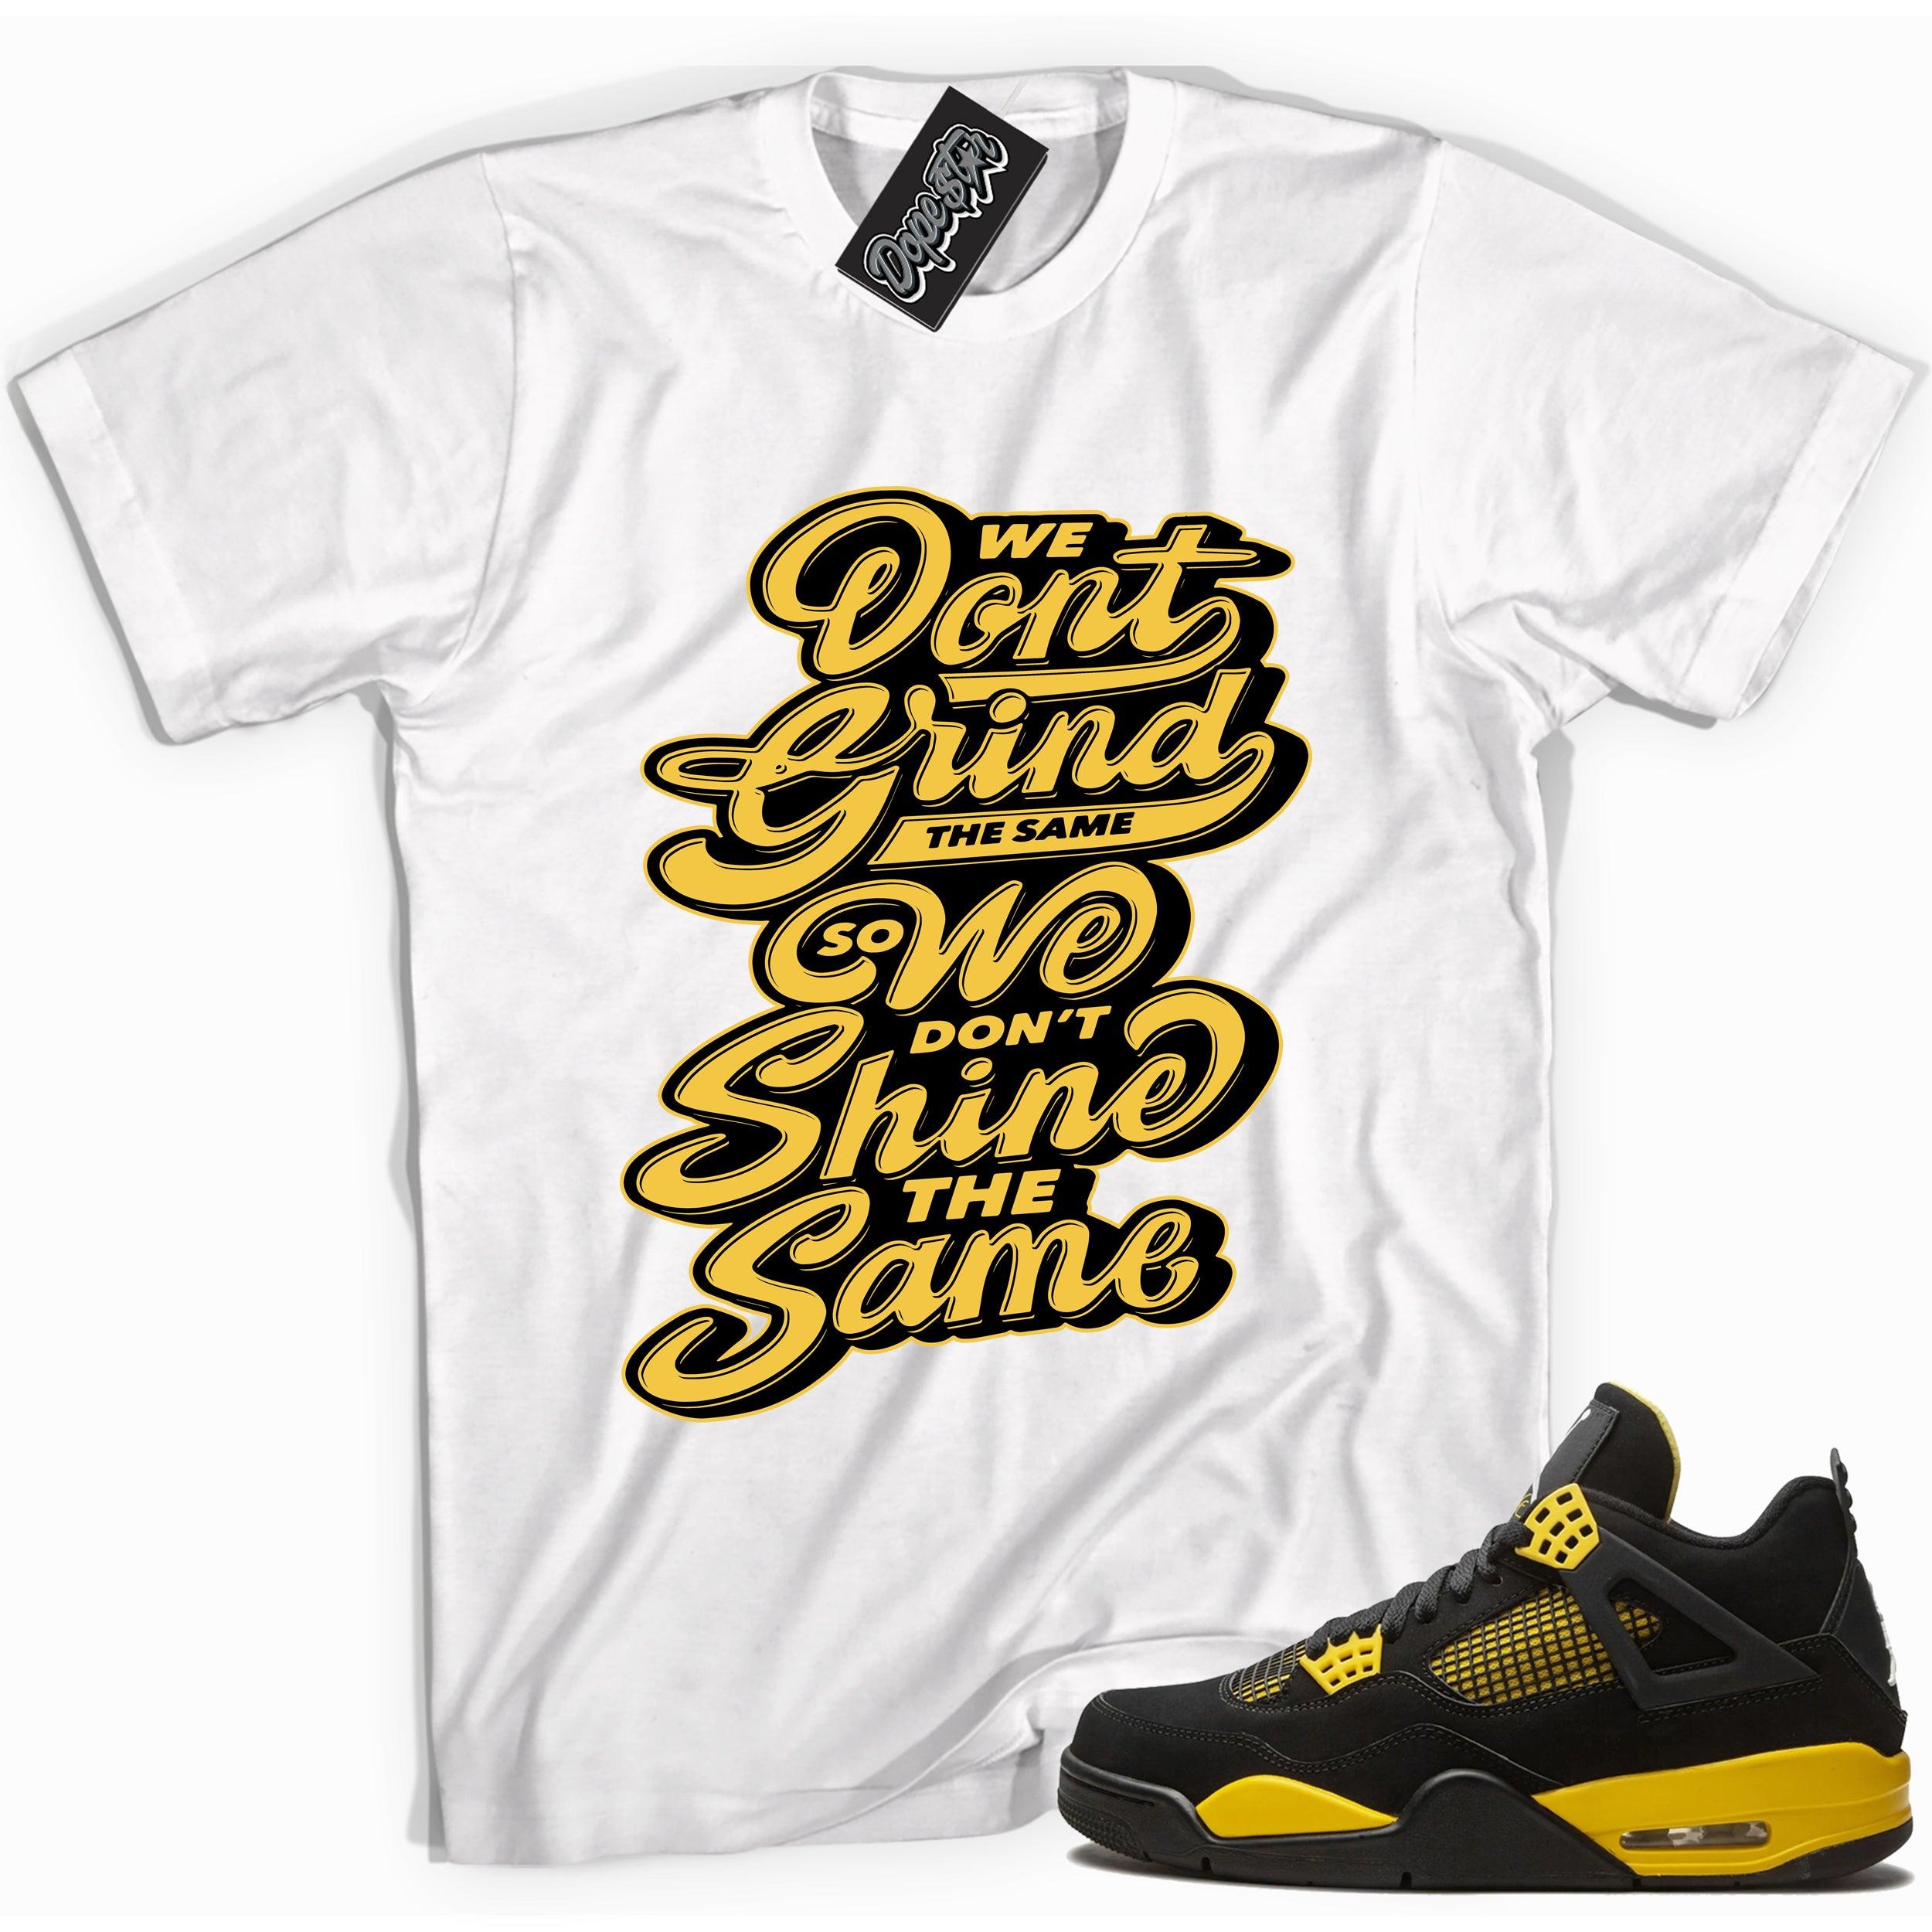 Cool white graphic tee with 'We don't grind the same so we don't shine the same' print, that perfectly matches Air Jordan 4 Thunder sneakers